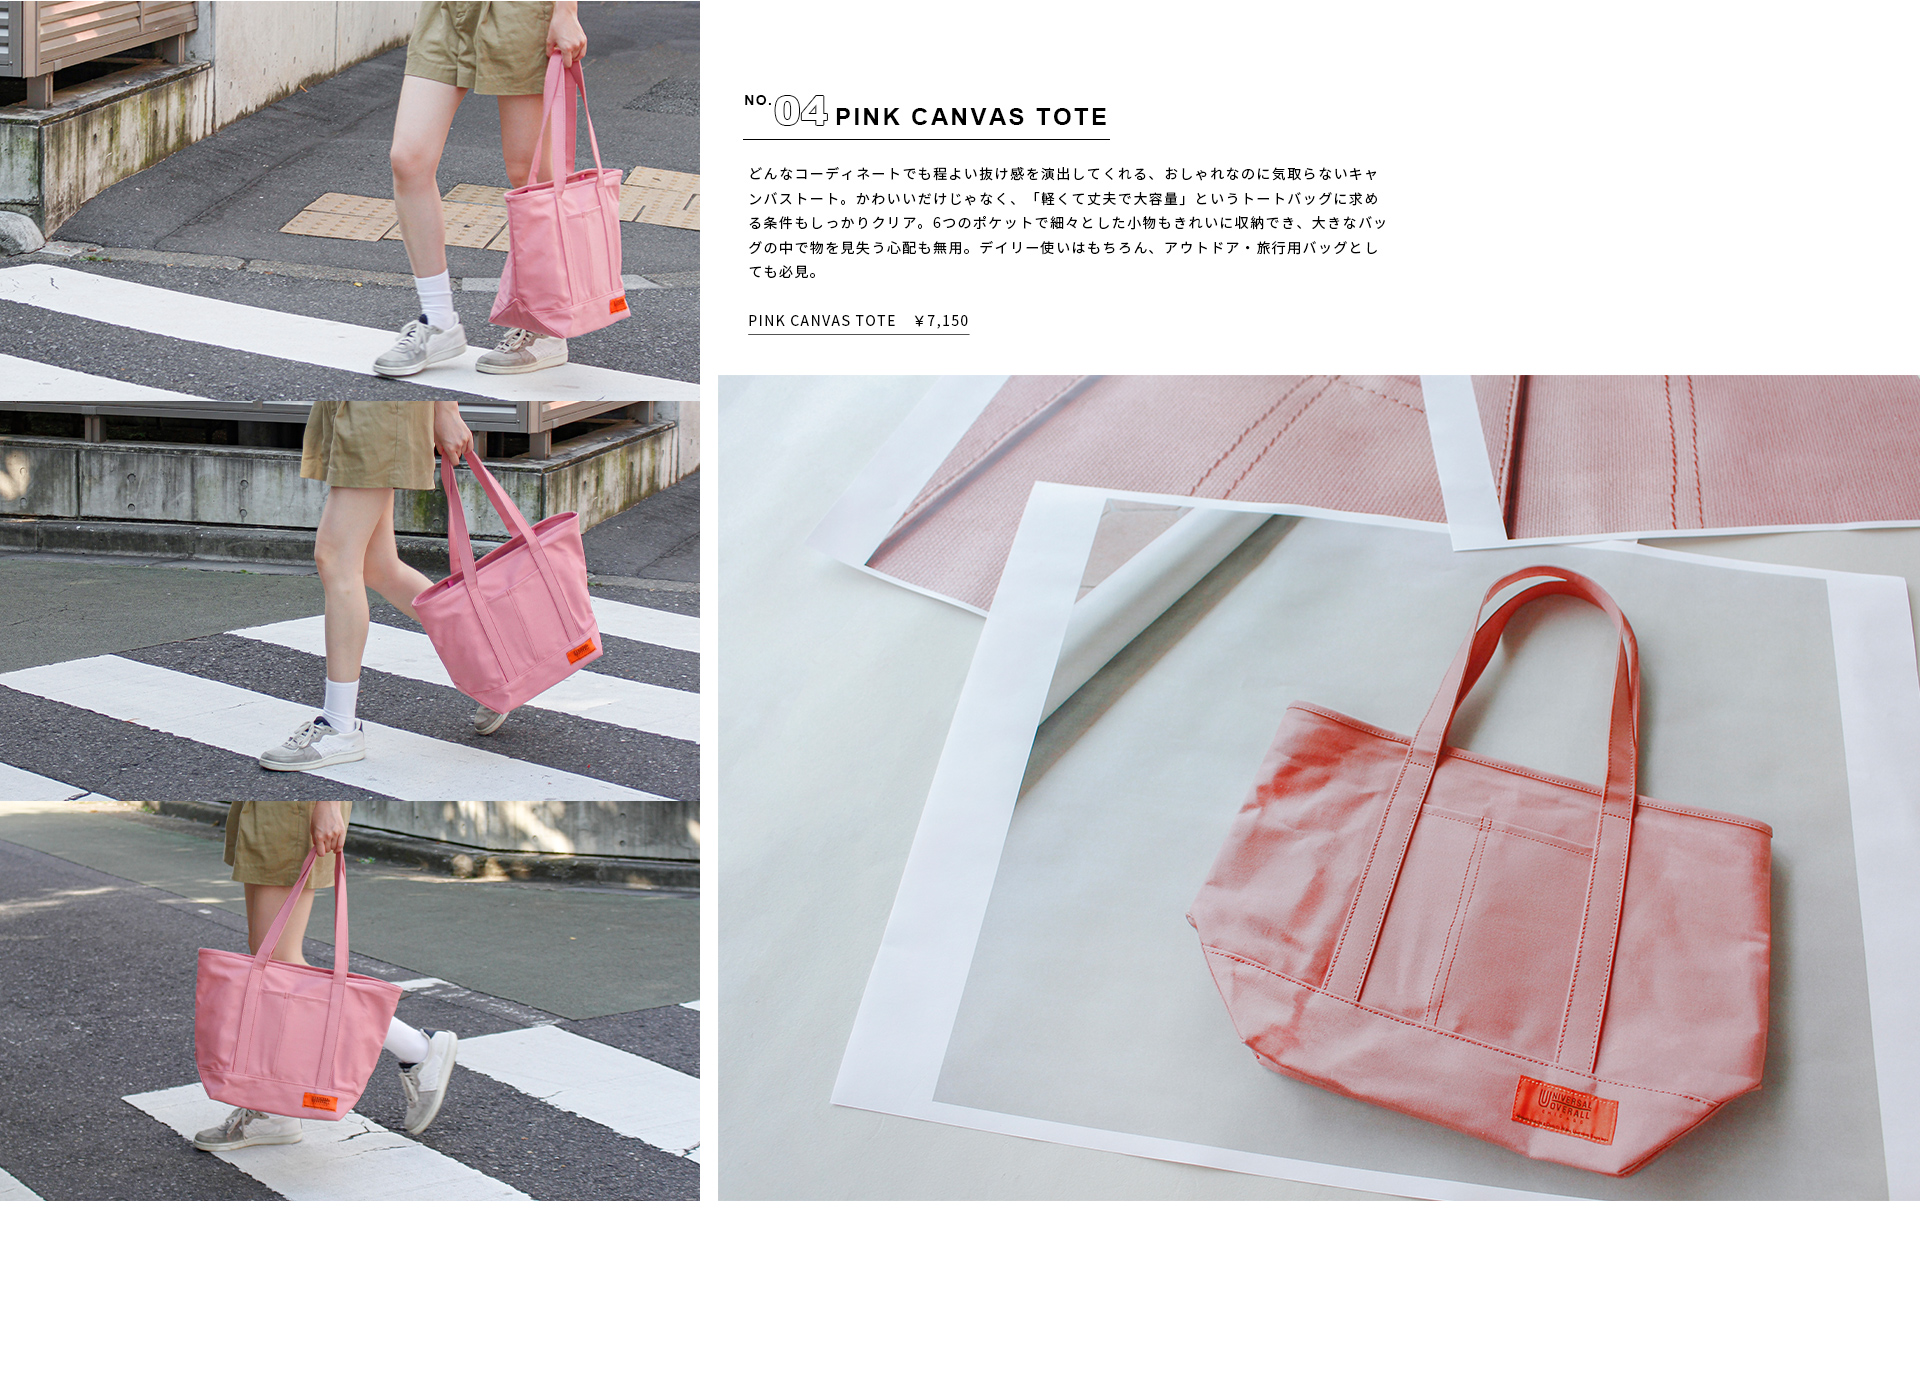 PINK CANVAS TOTE